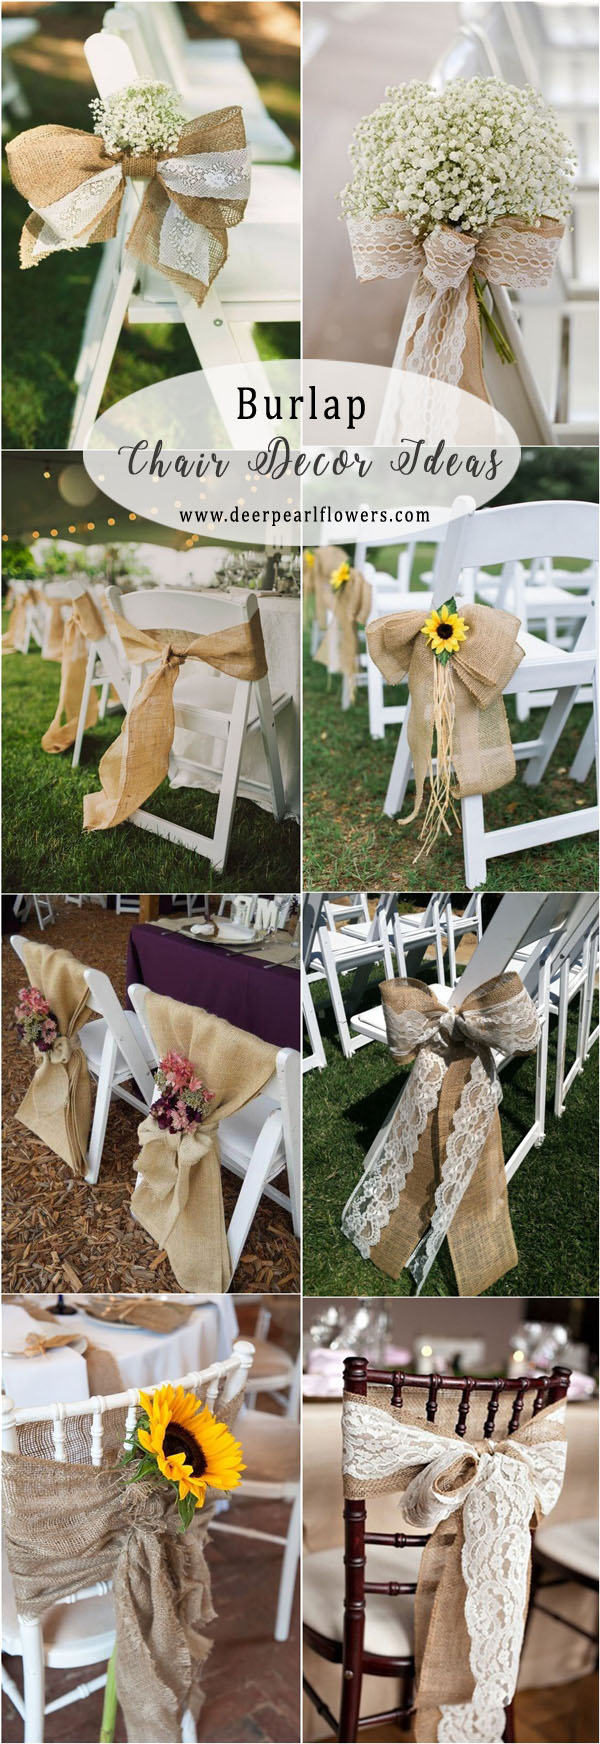 Rustic country burlap and lace wedding chair decor ideas